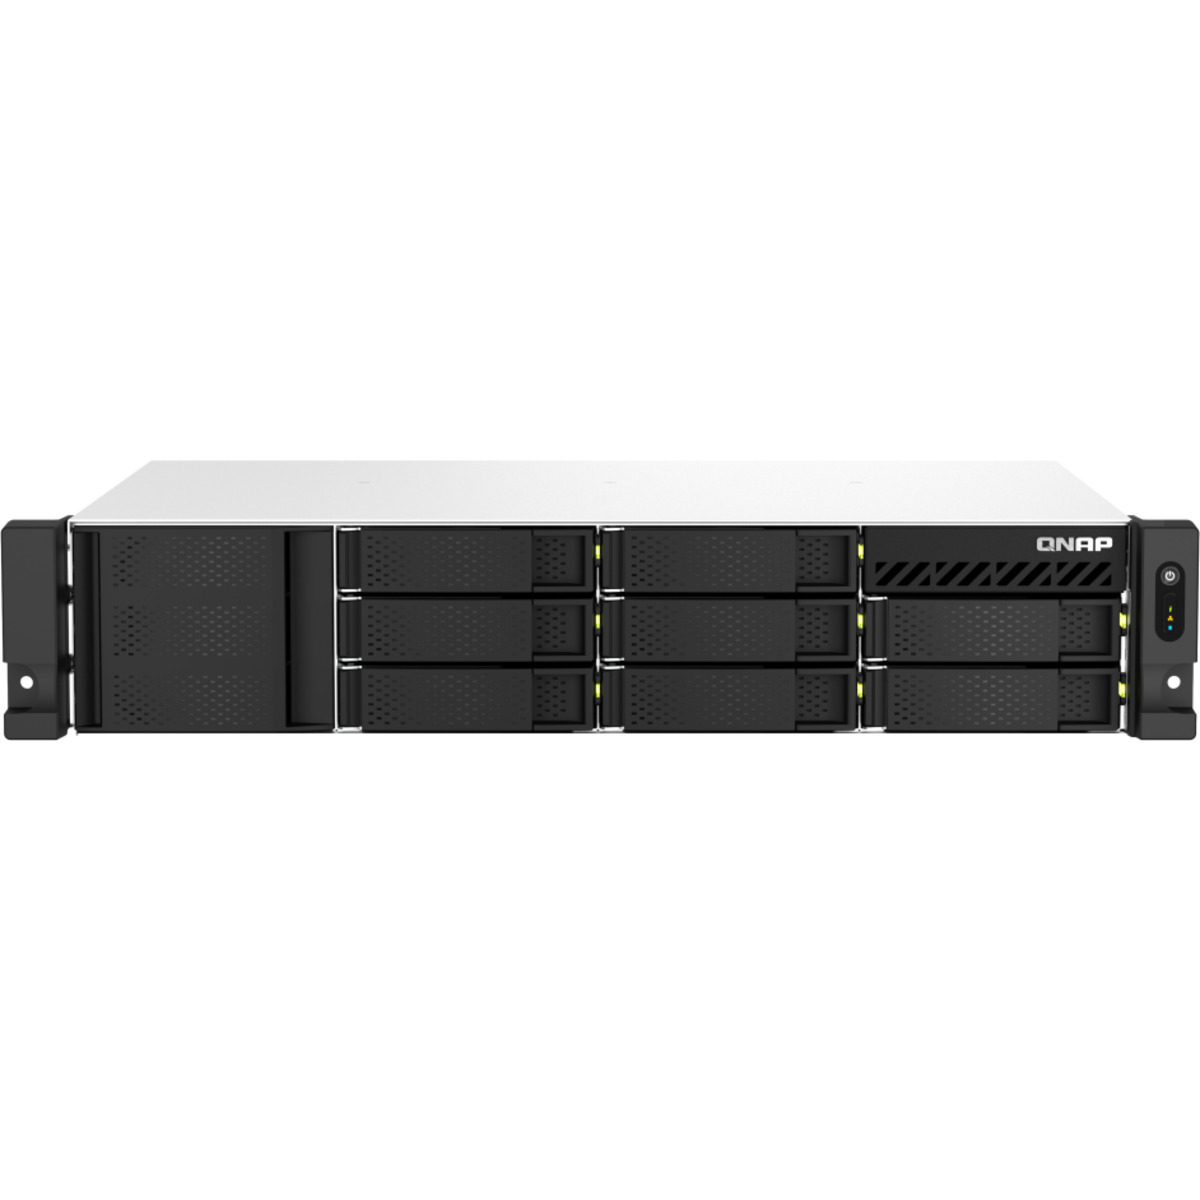 buy $4547 QNAP TS-873AeU-RP 96tb RackMount NAS - Network Attached Storage Device 8x12000gb Seagate IronWolf Pro ST12000NT001 3.5 7200rpm SATA 6Gb/s HDD NAS Class Drives Installed - Burn-In Tested - FREE RAM UPGRADE - nas headquarters buy network attached storage server device das new raid-5 free shipping simply usa TS-873AeU-RP